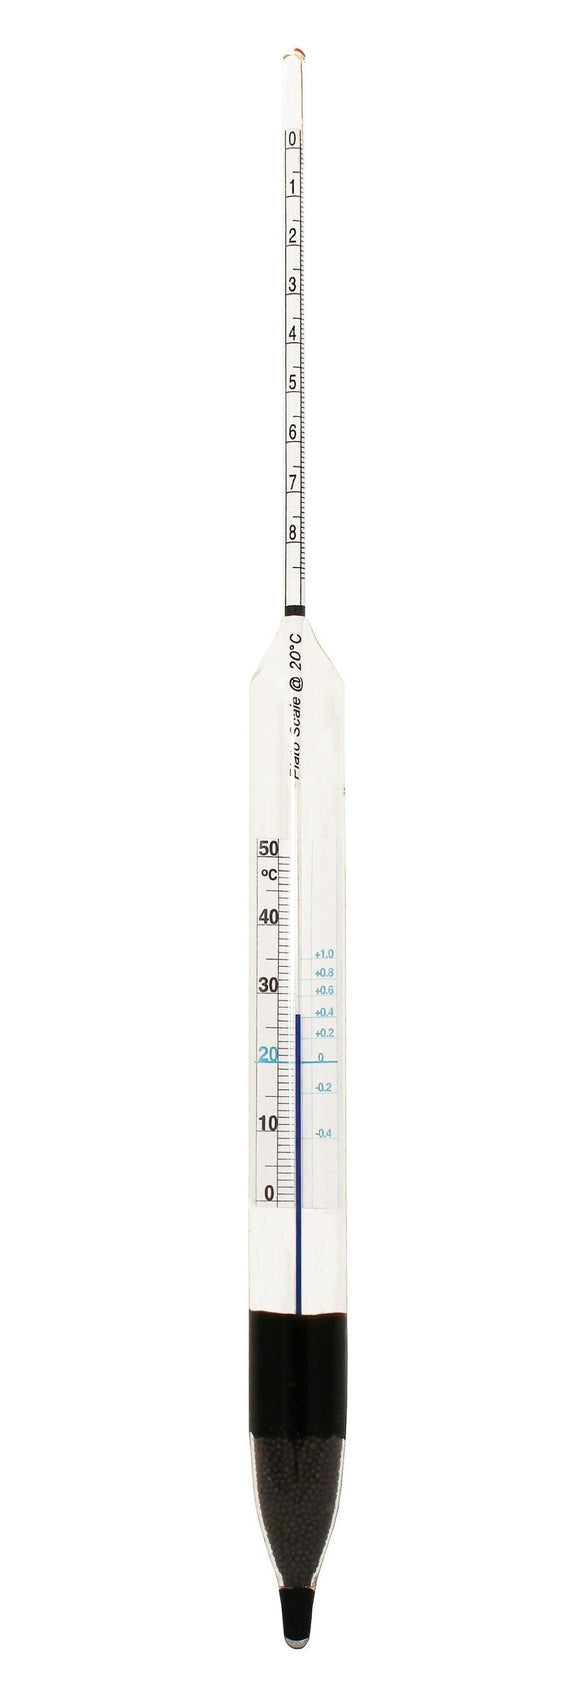 Vee Gee Scientific VeeGee Maximum and Minimum Digital Dual-Scale Thermometer, with Hygrometer and C